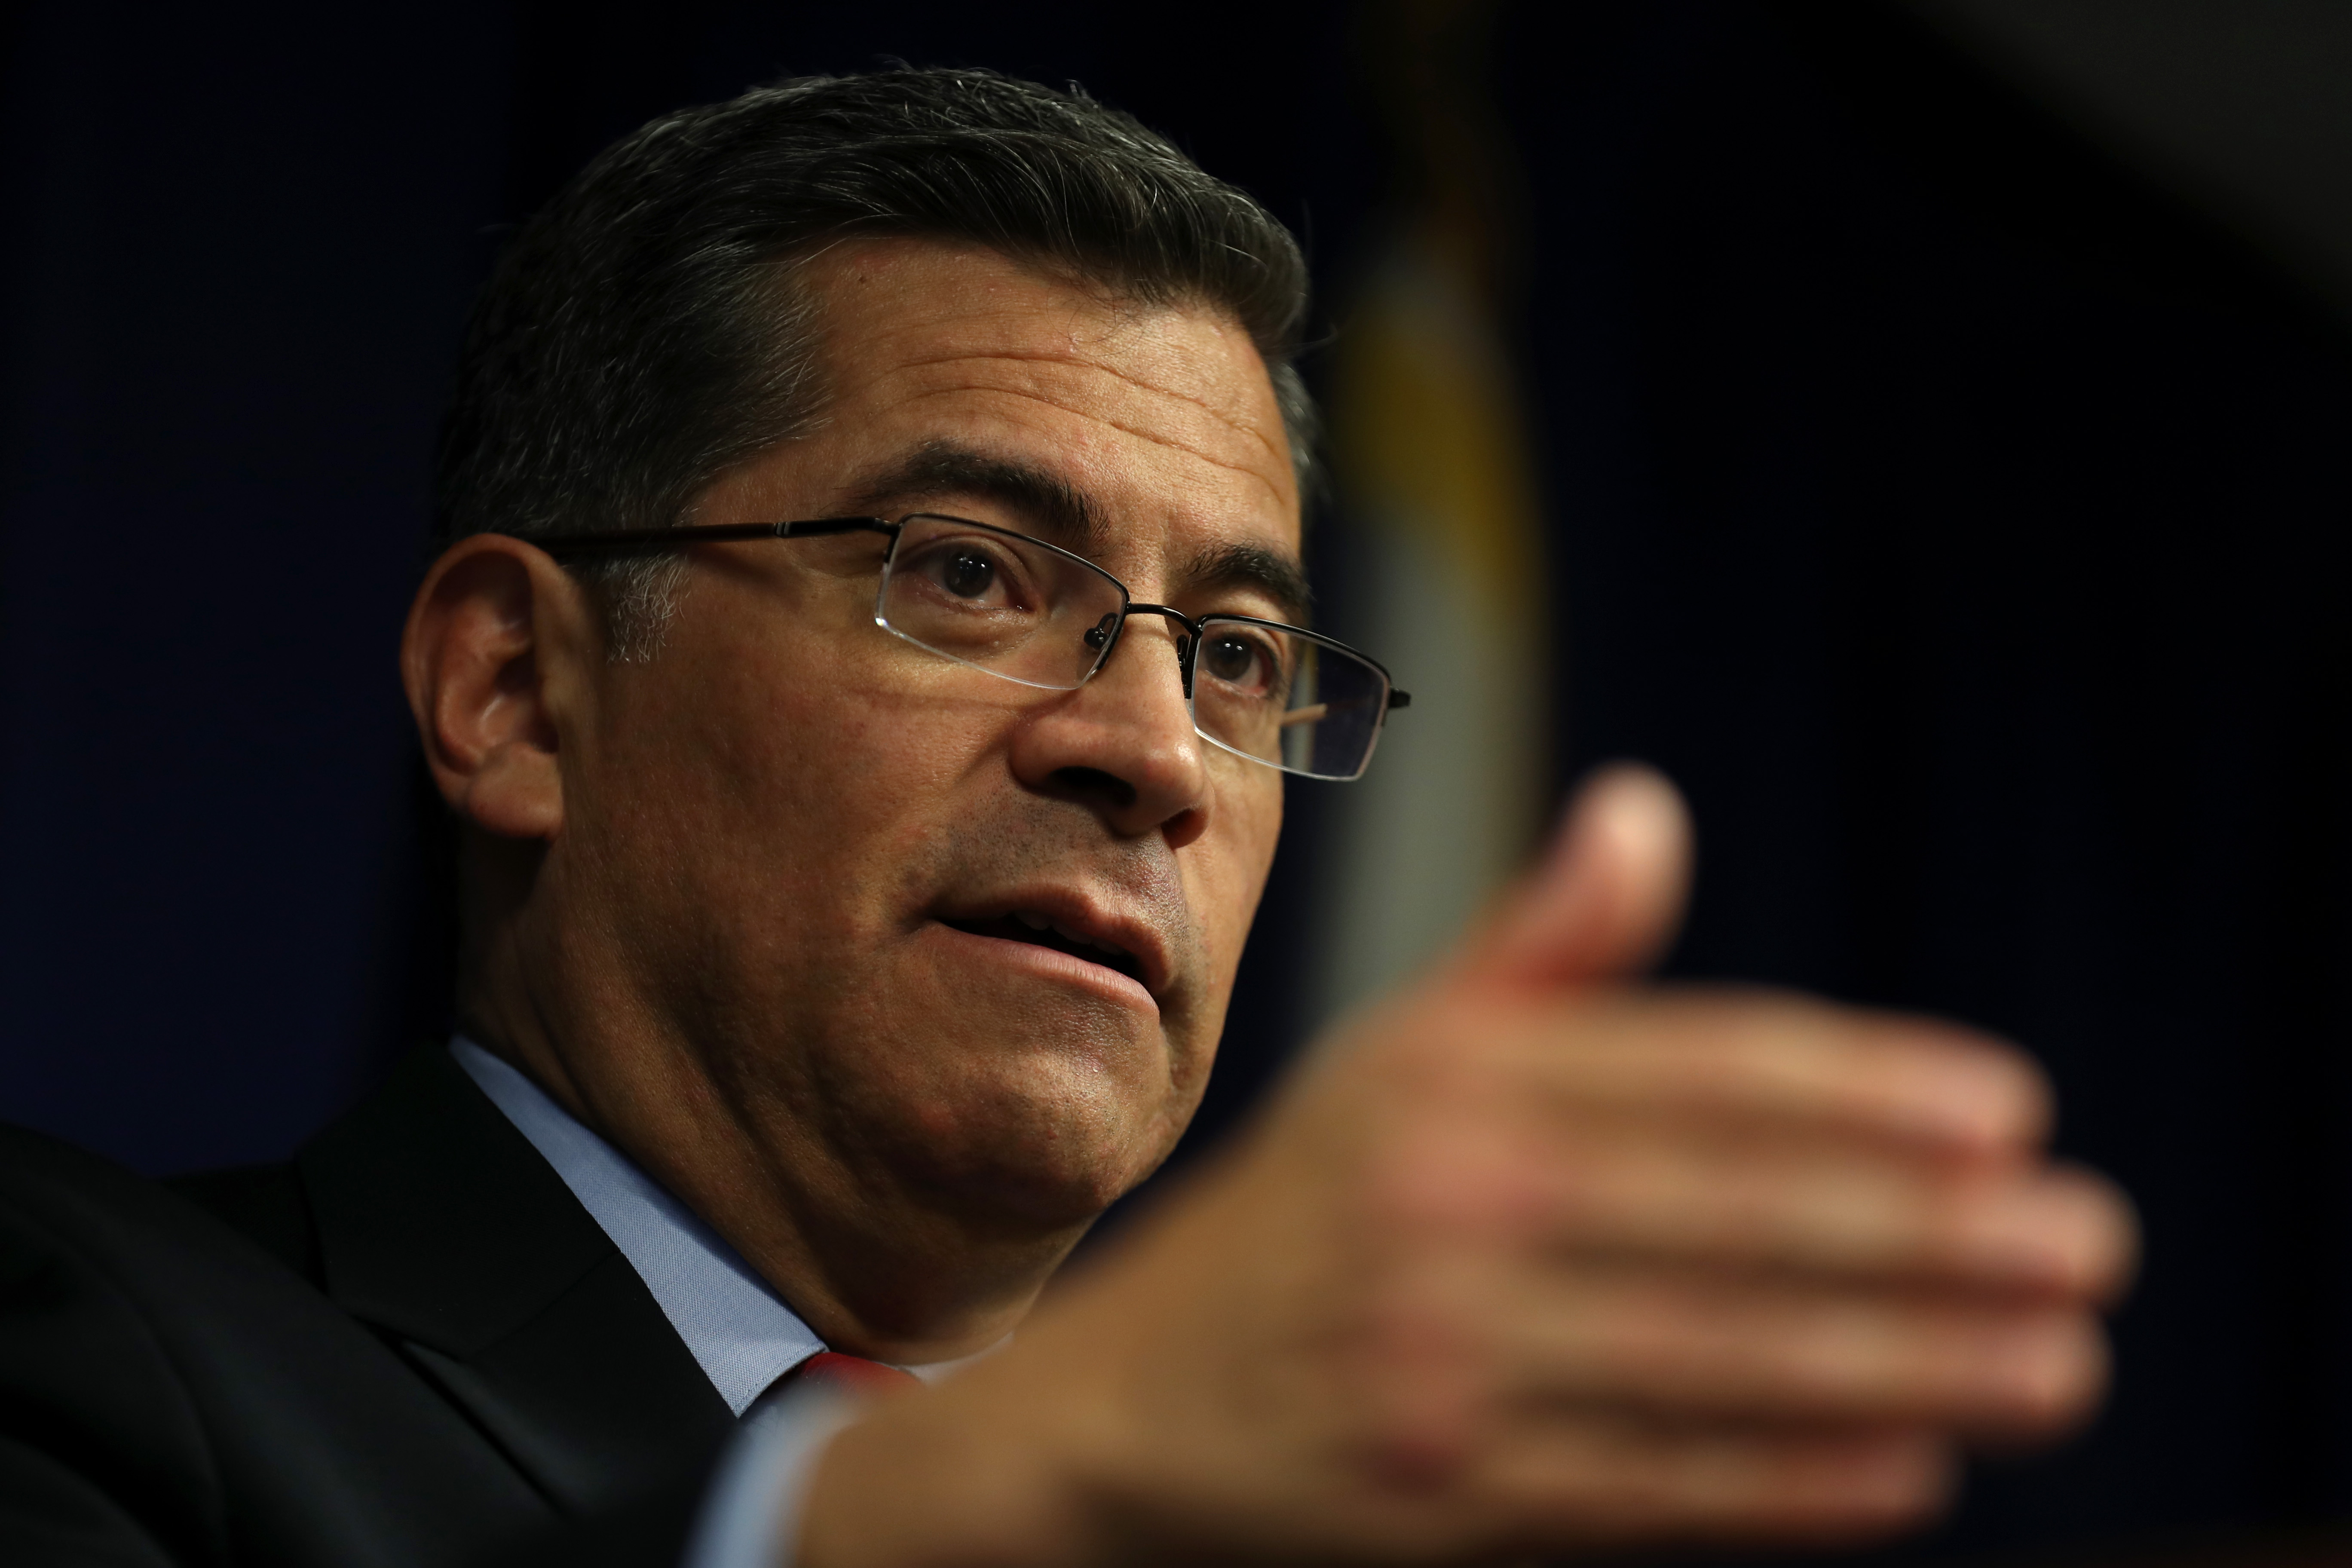 Xavier Becerra is the first Latino to serve as California's attorney general.